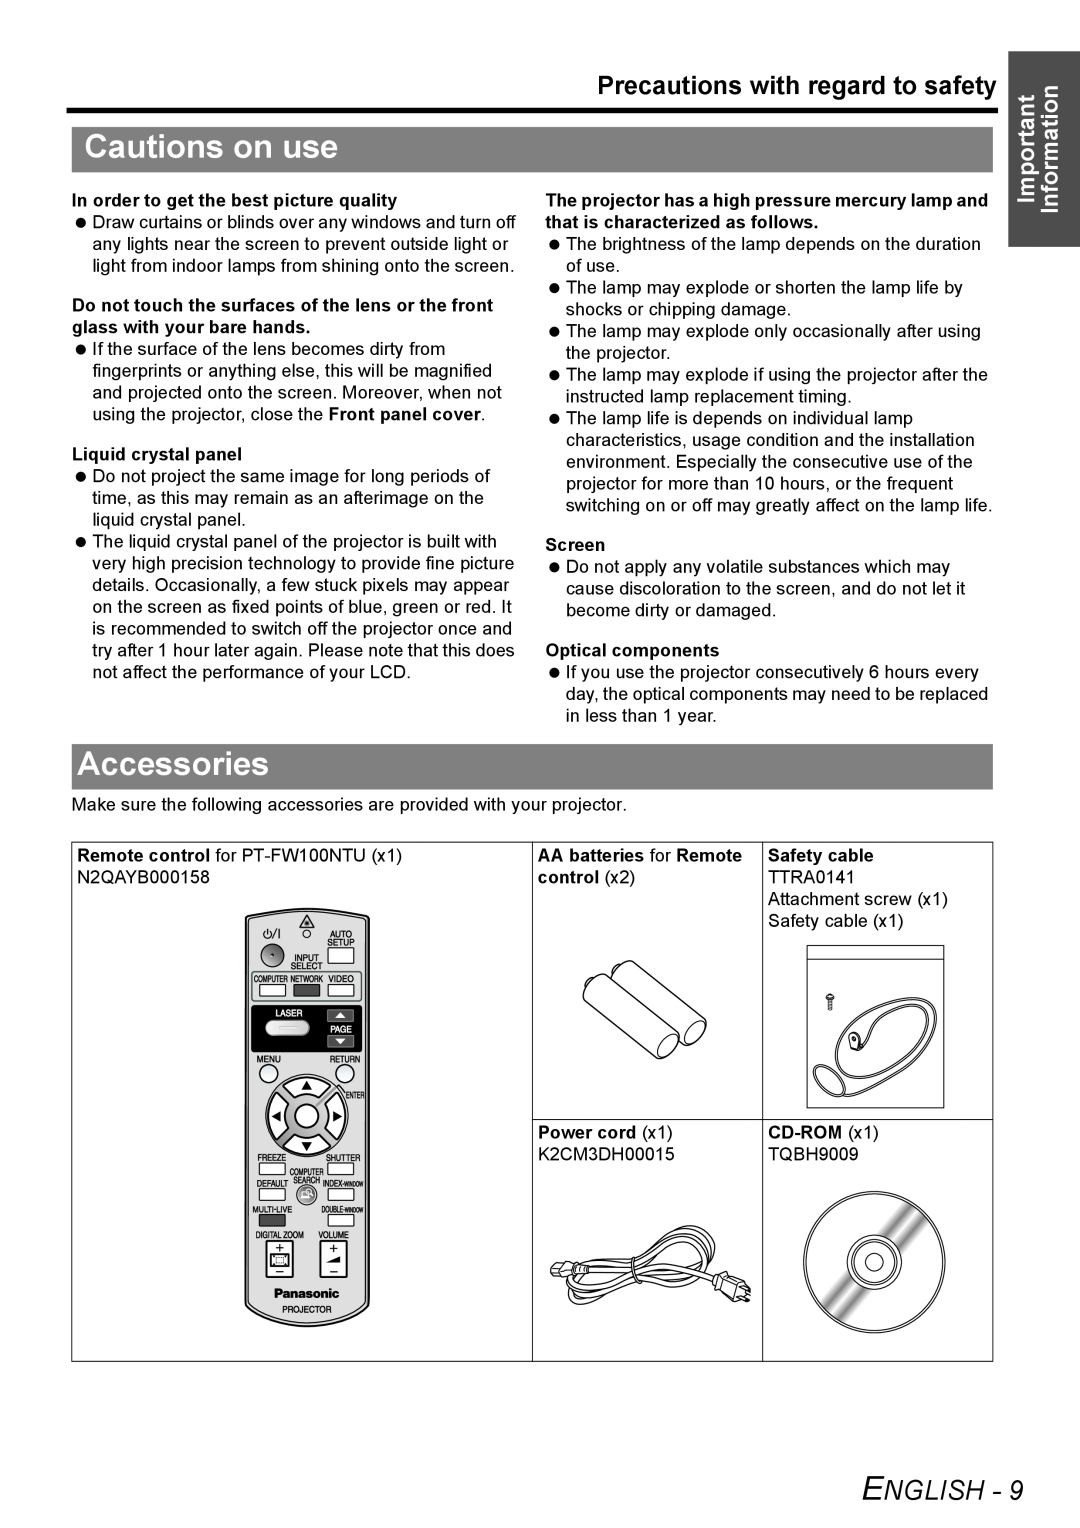 Philips PT-FW100NTU manual Cautions on use, Accessories, English, Precautions with regard to safety, Important Information 